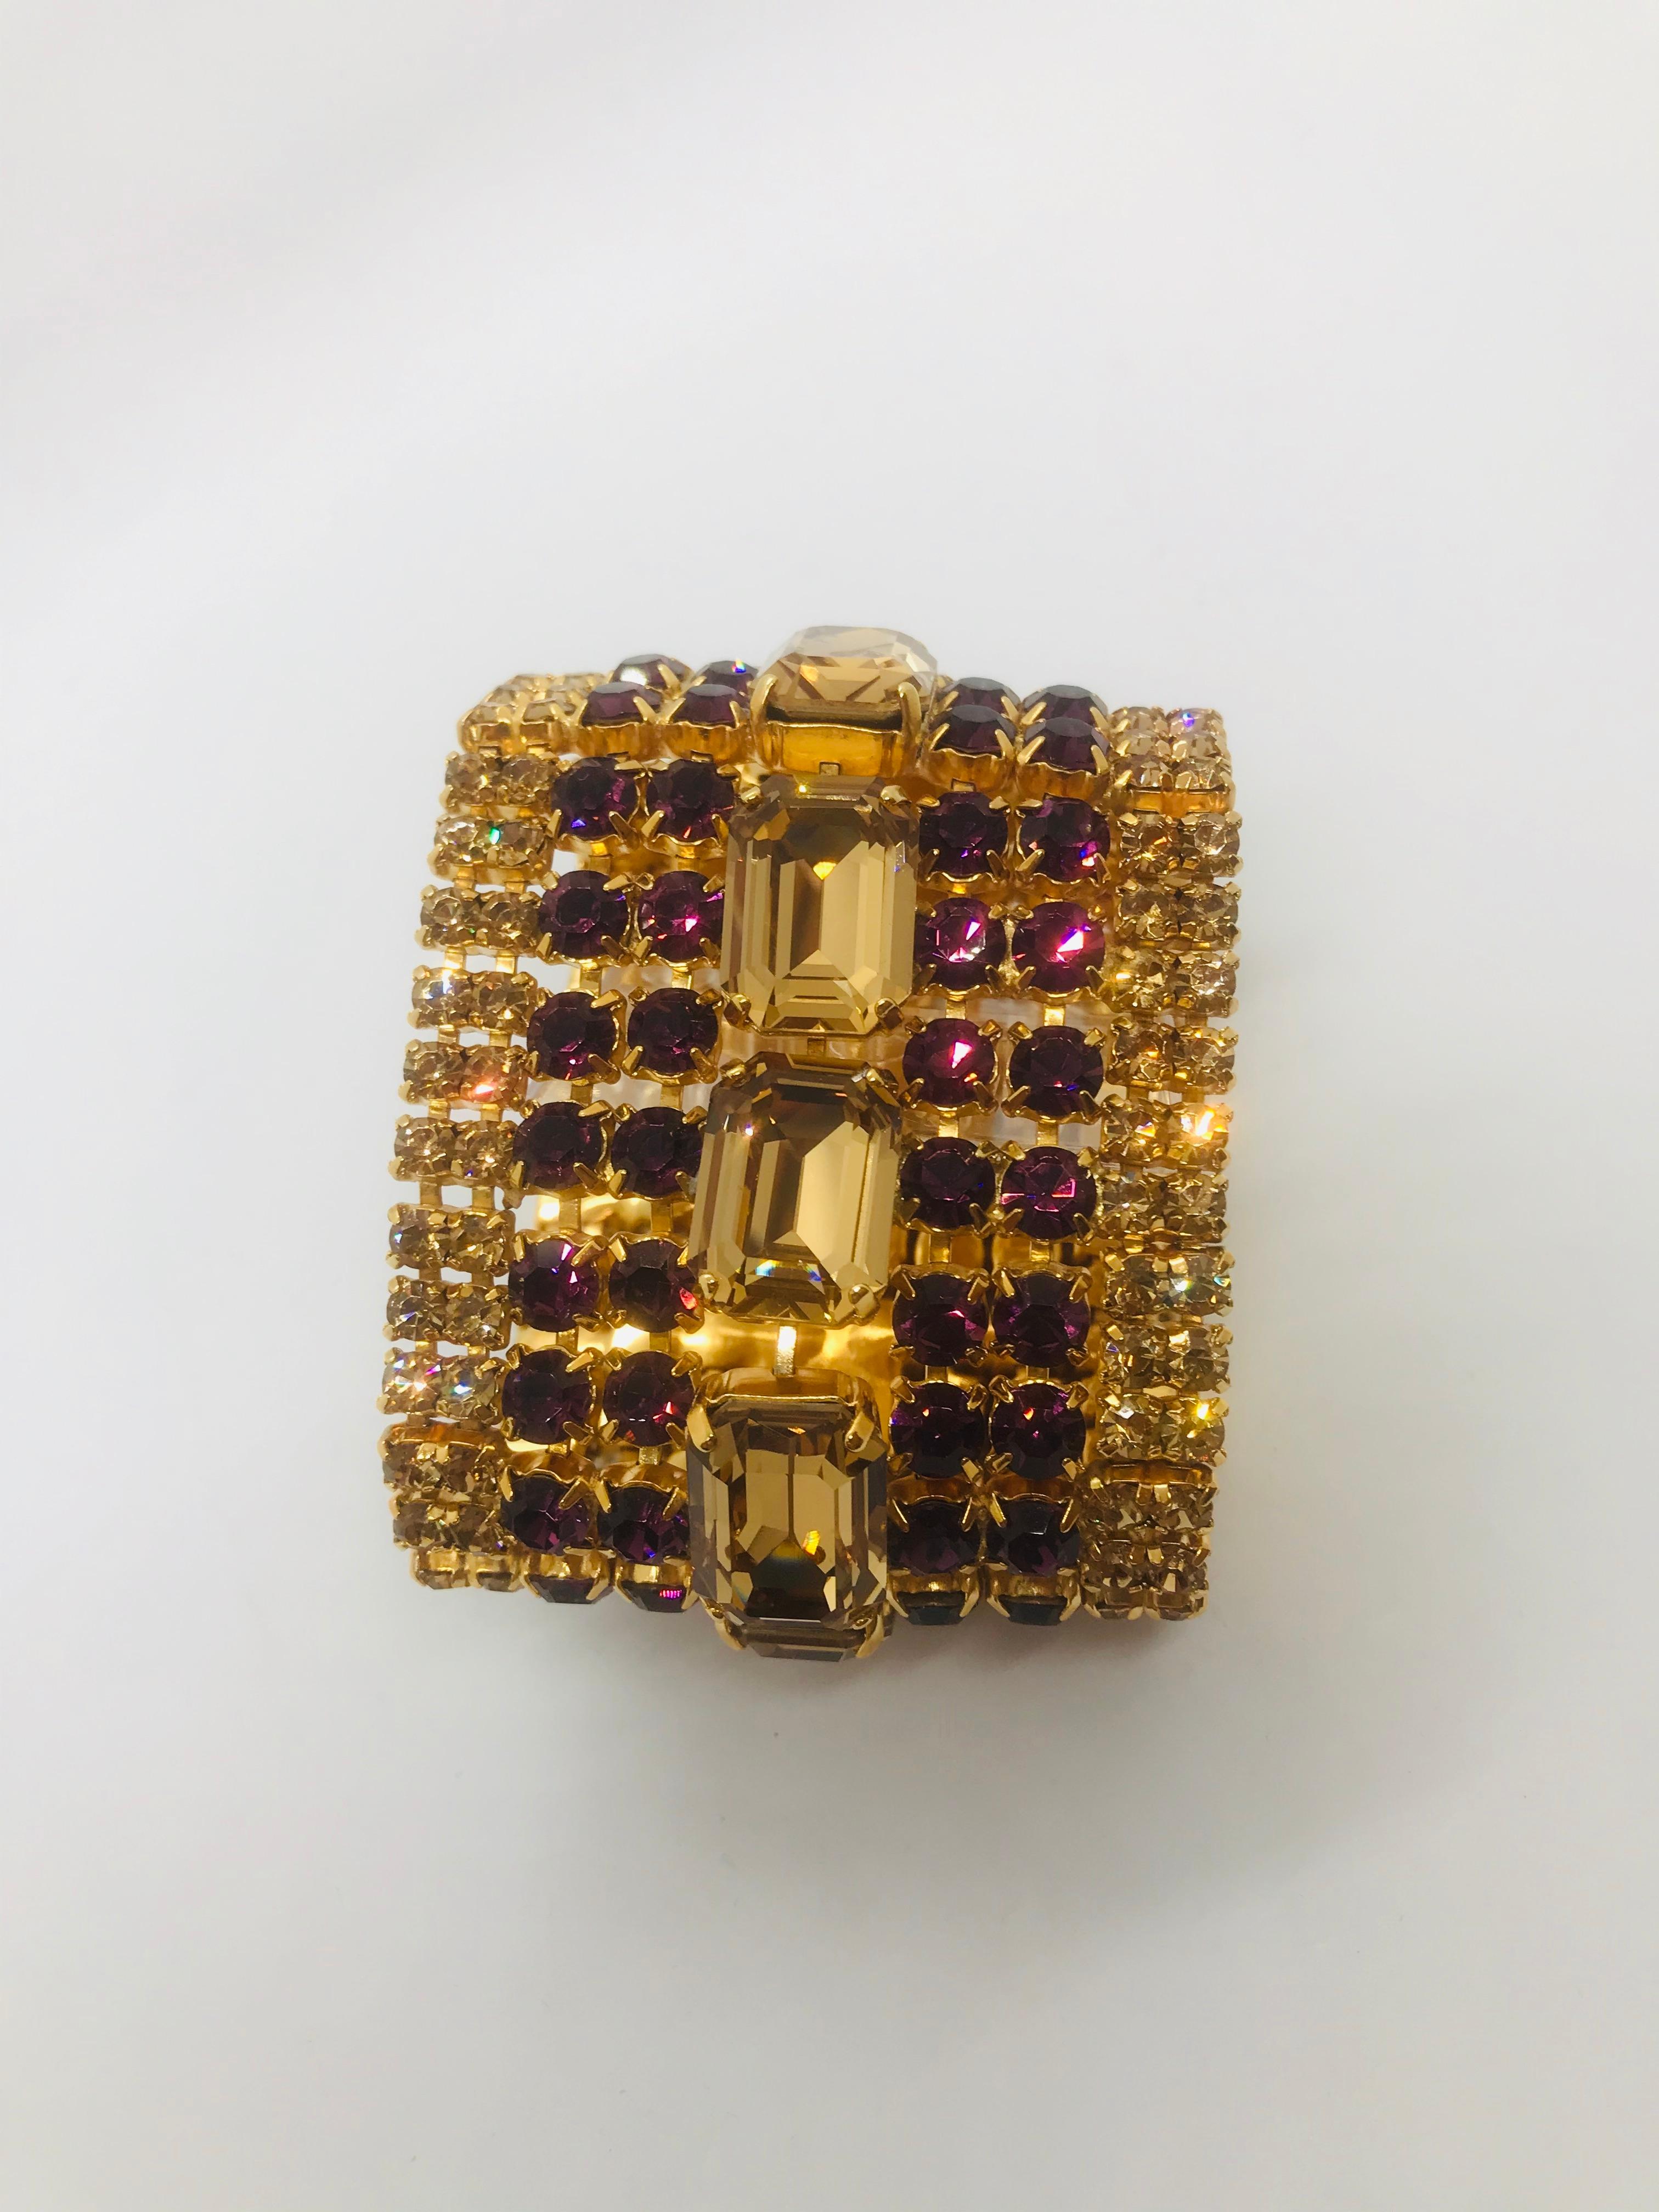 Classic and clean lines best describe our smoked topaz and amethyst Austrian crystal flex cuff bracelet.  This bracelet features a row of large emerald cut light Colorado topaz Swarovski contemporary crystals running end to end.  The bracelet is